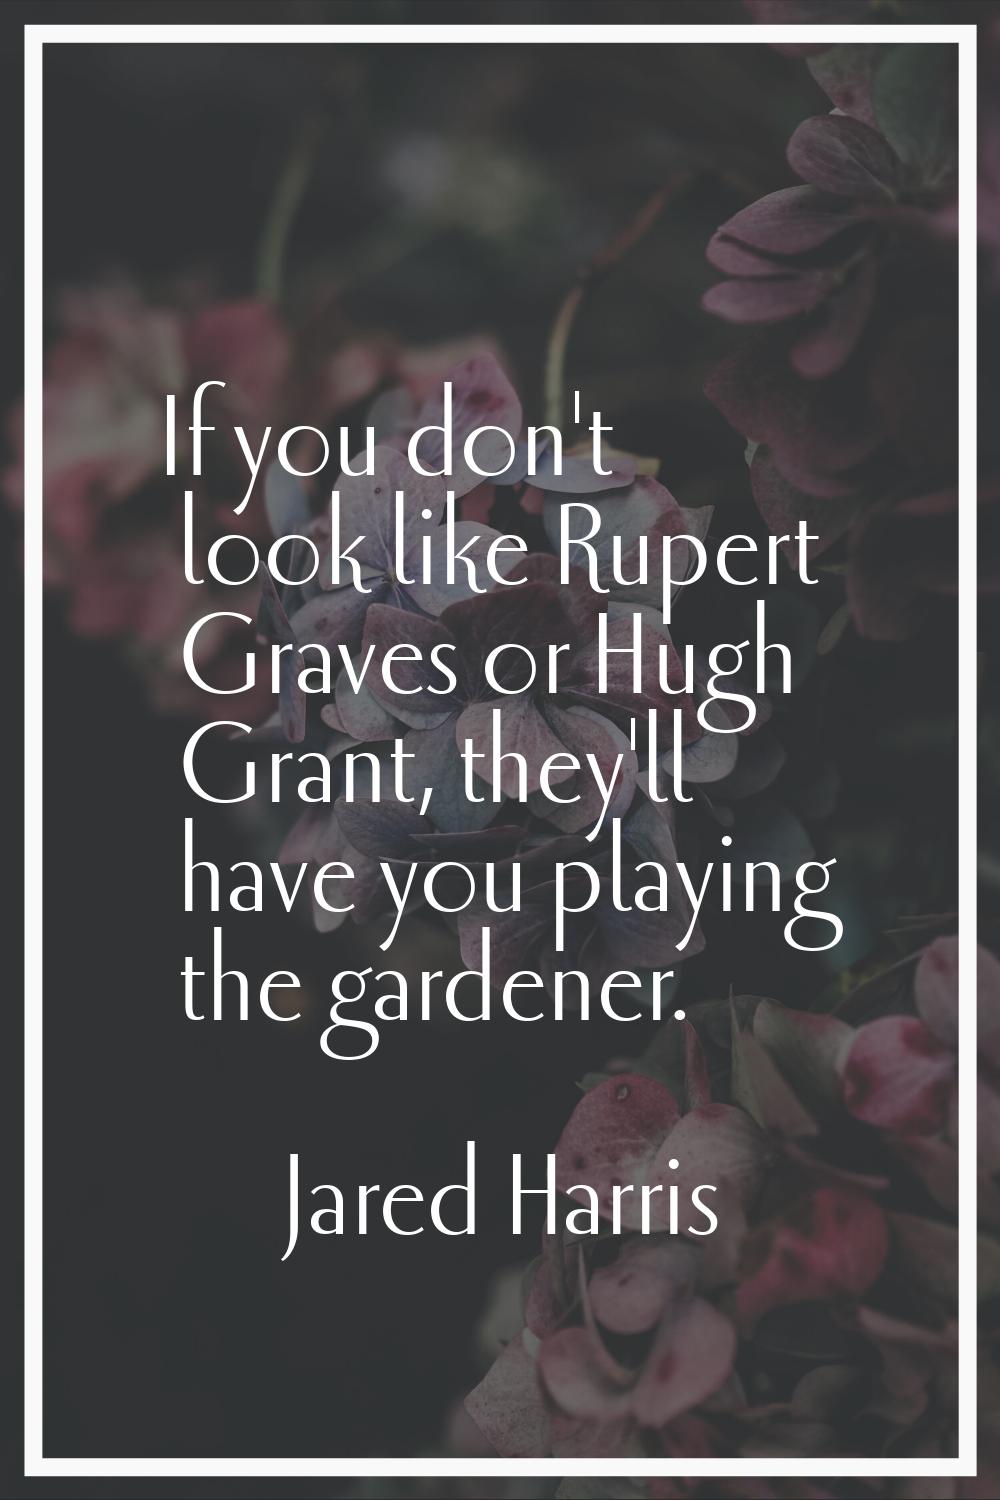 If you don't look like Rupert Graves or Hugh Grant, they'll have you playing the gardener.